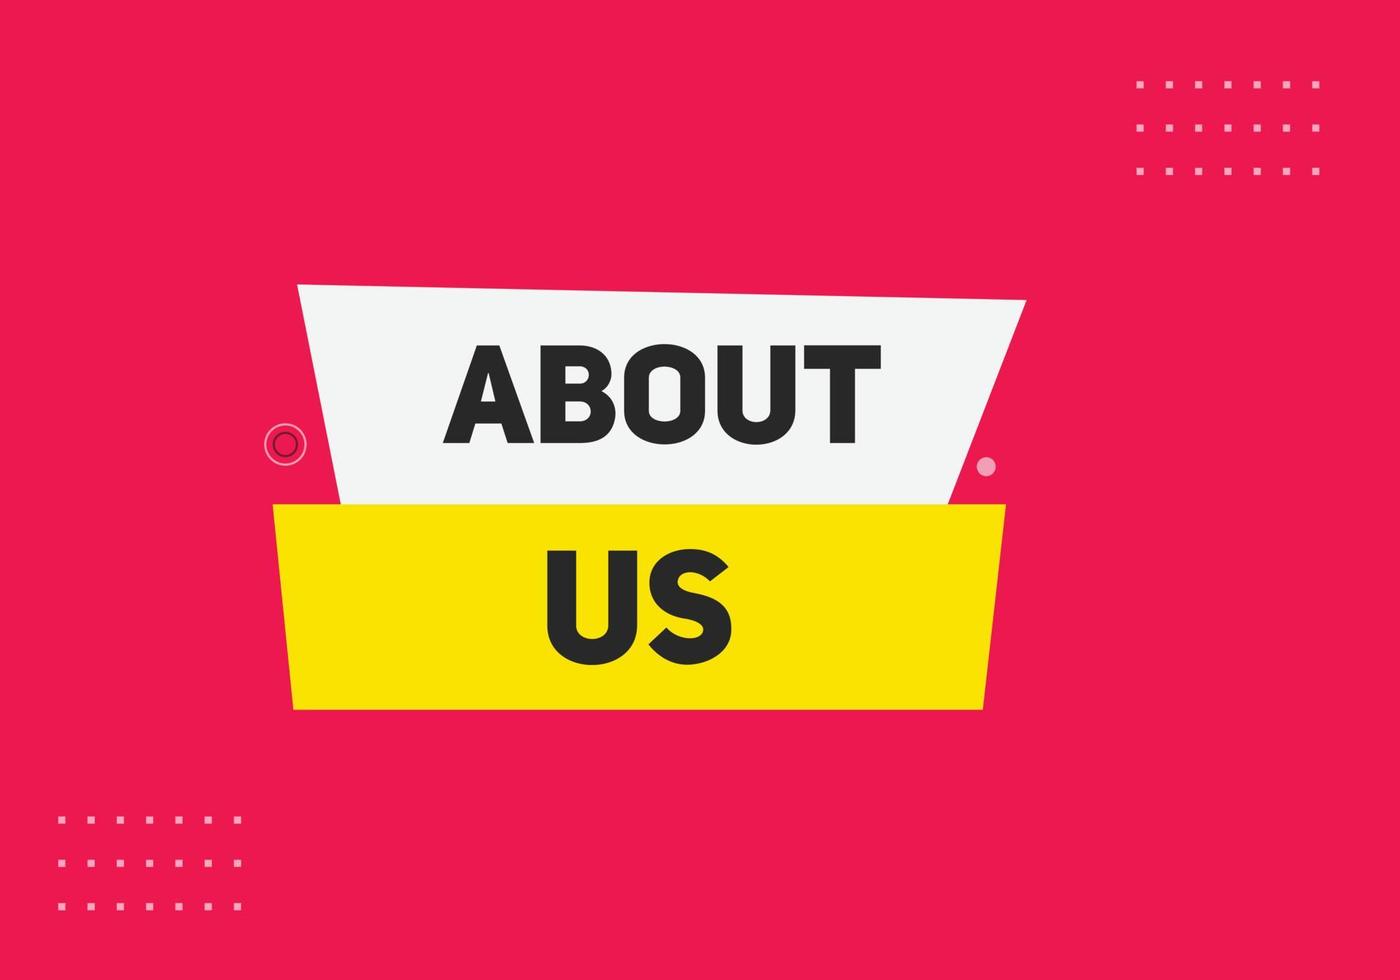 about us text web button template banner vector